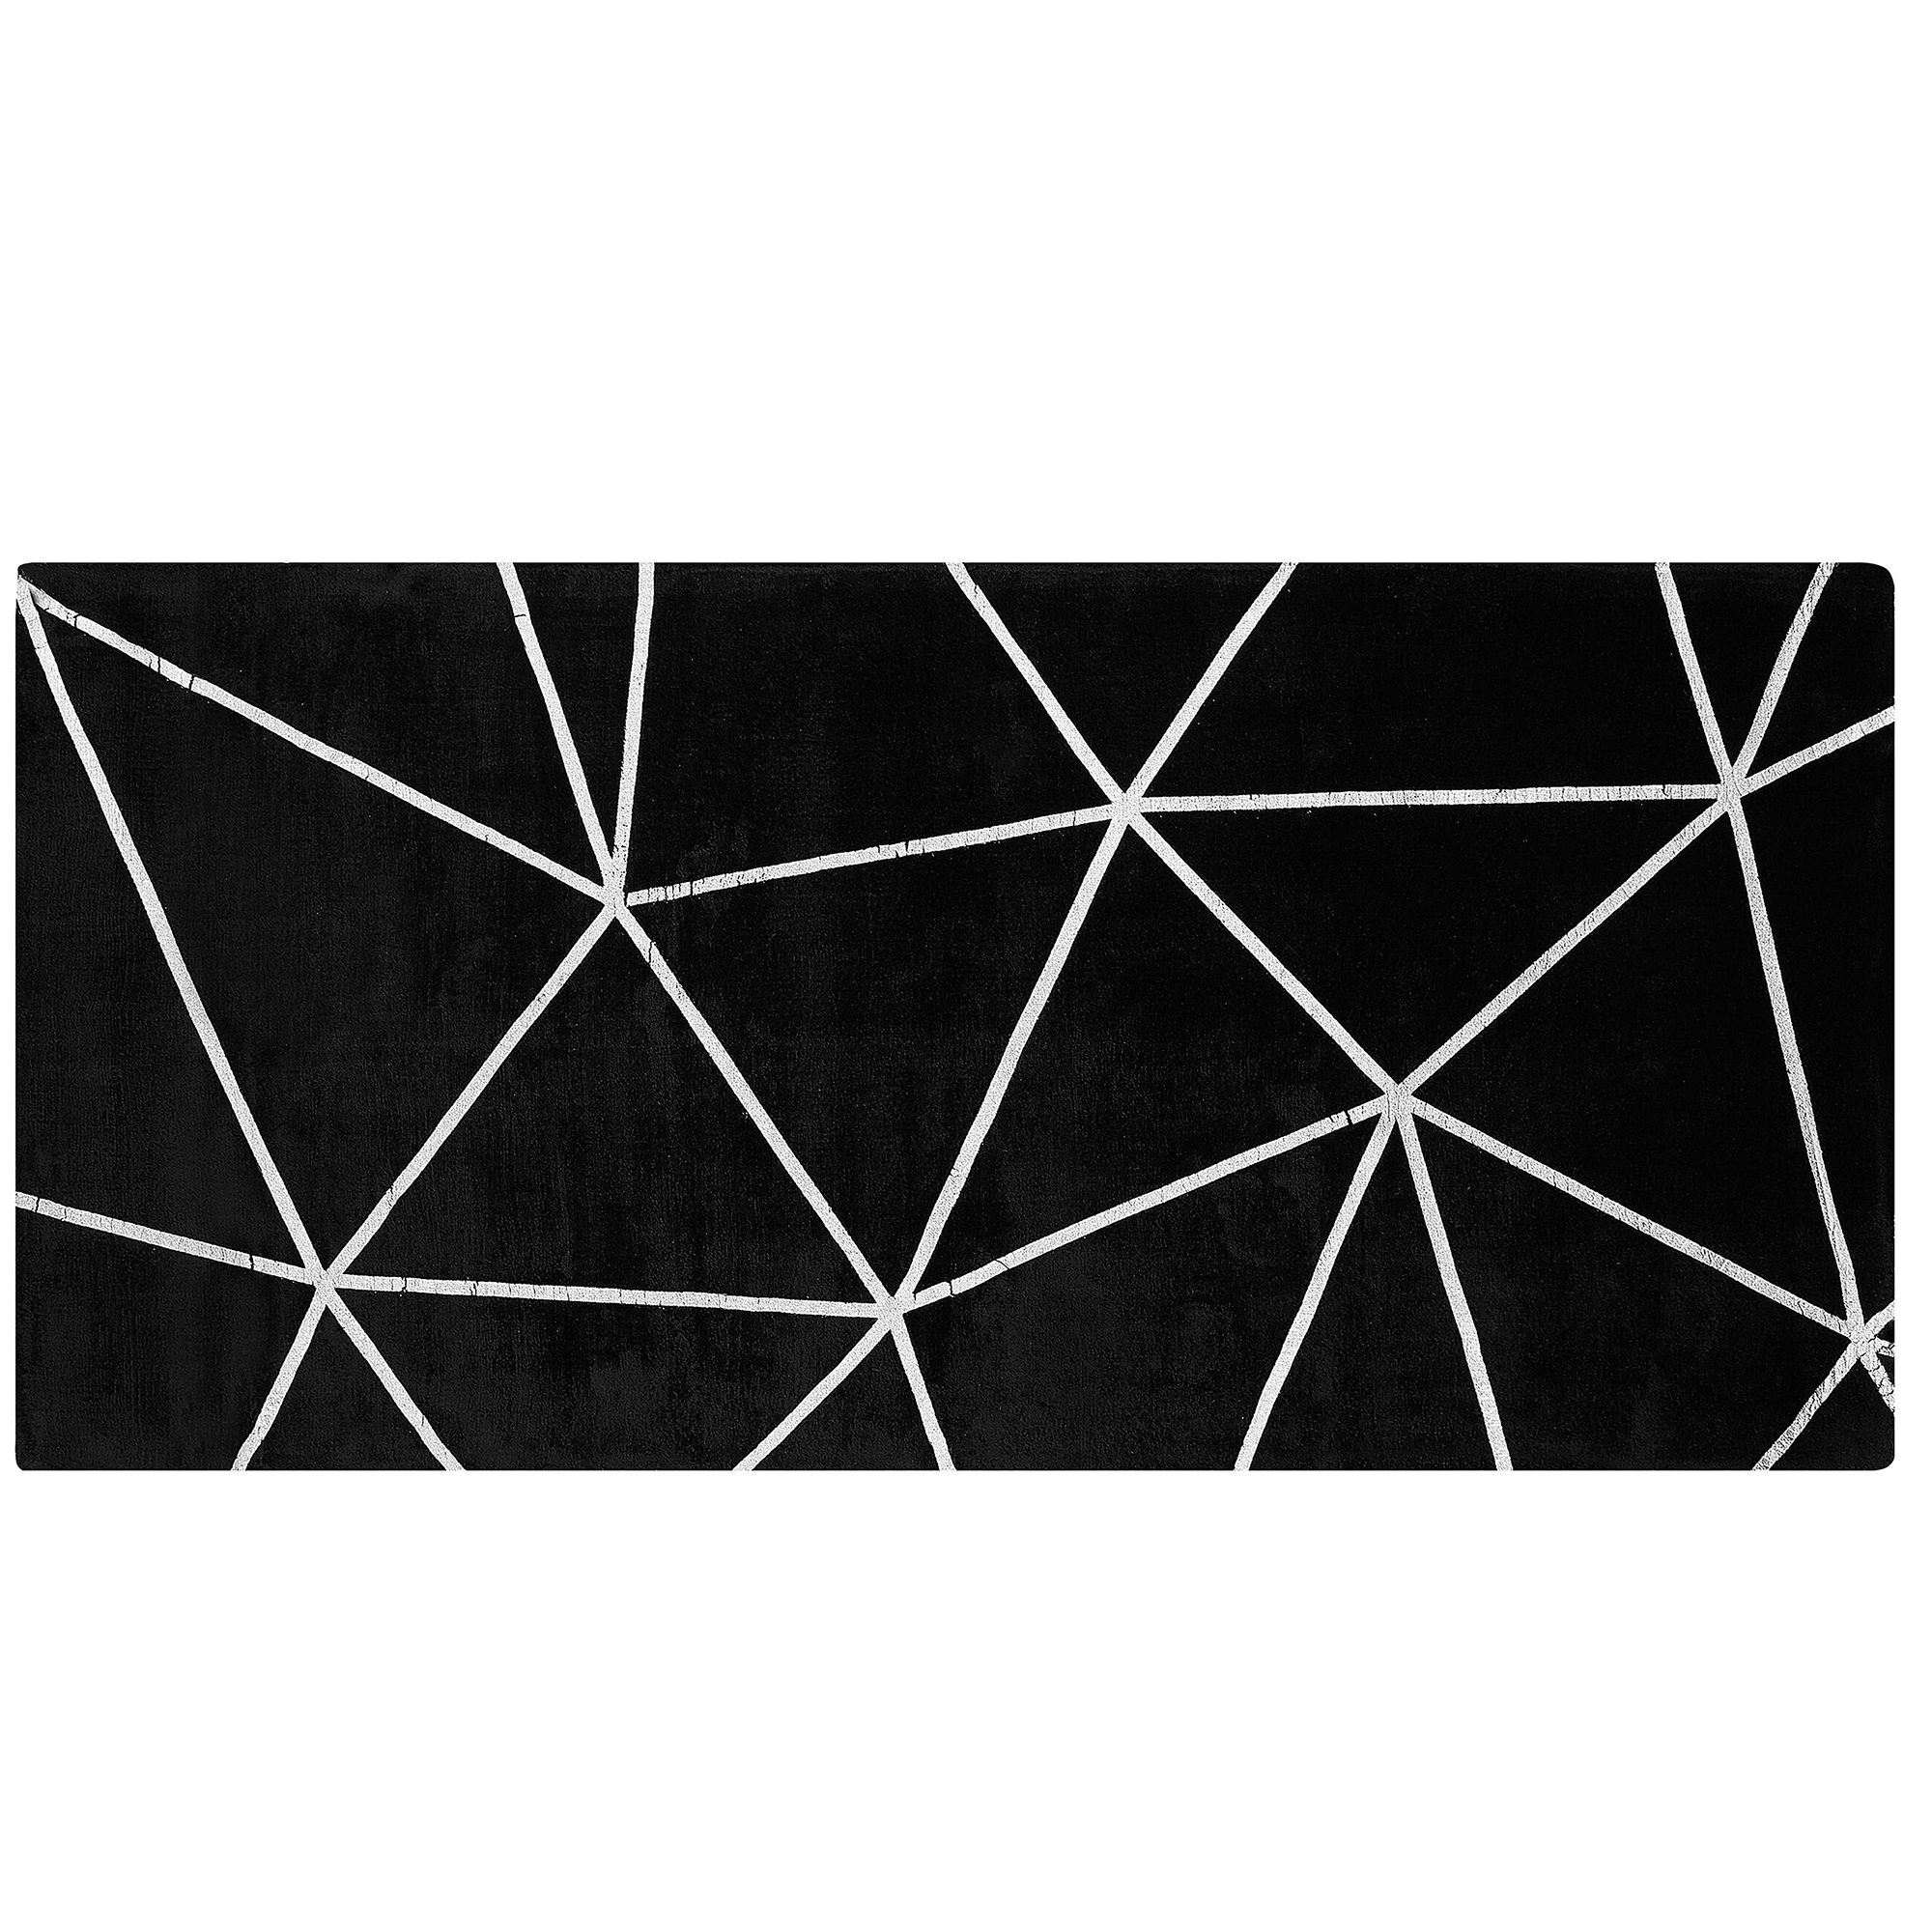 Beliani Area Rug Black with Silver Geometric Pattern Viscose with Cotton 80 x 150 cm Hand Woven Modern Glam Style